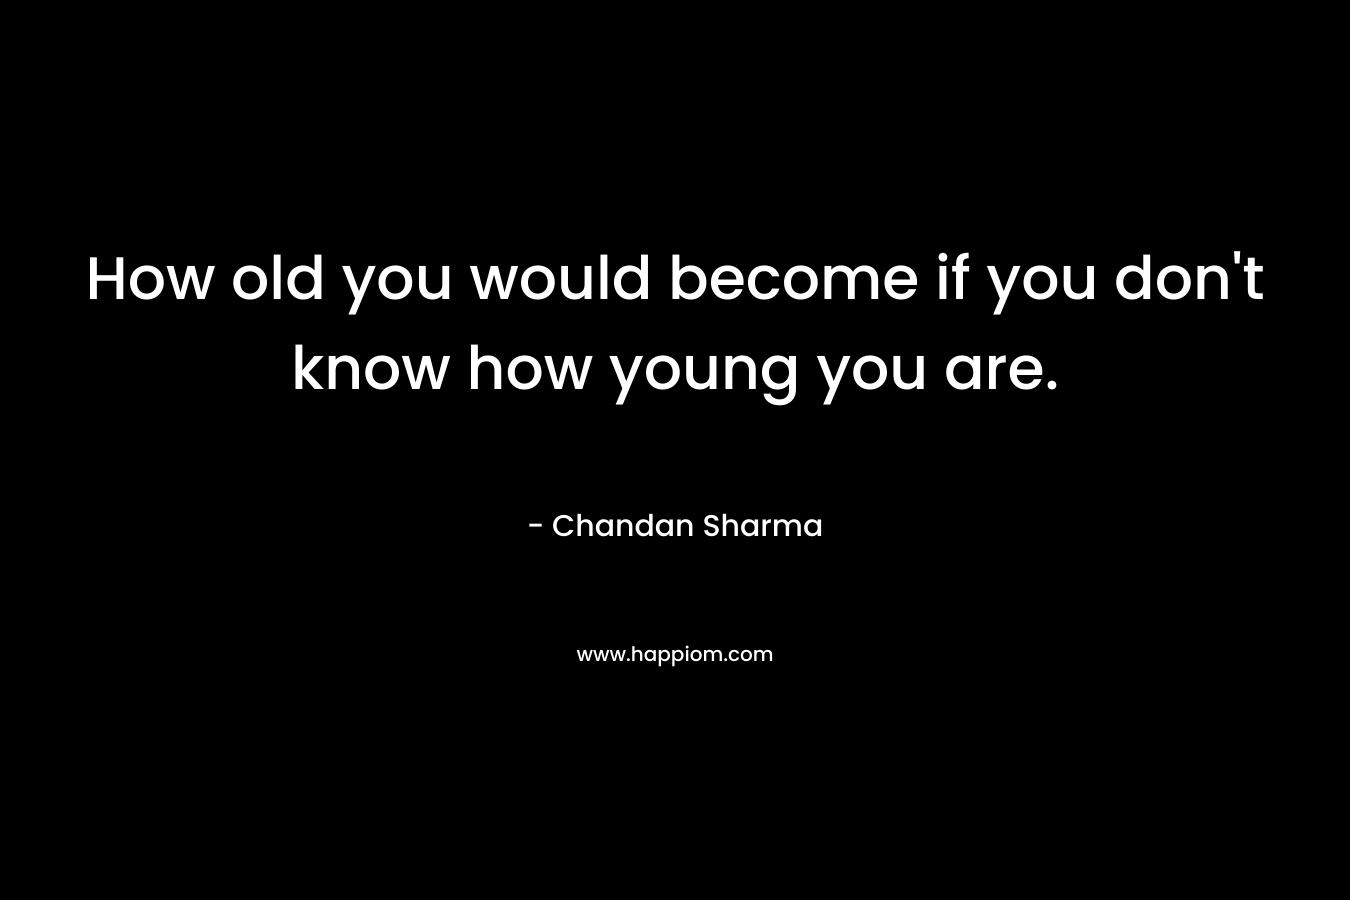 How old you would become if you don’t know how young you are. – Chandan Sharma